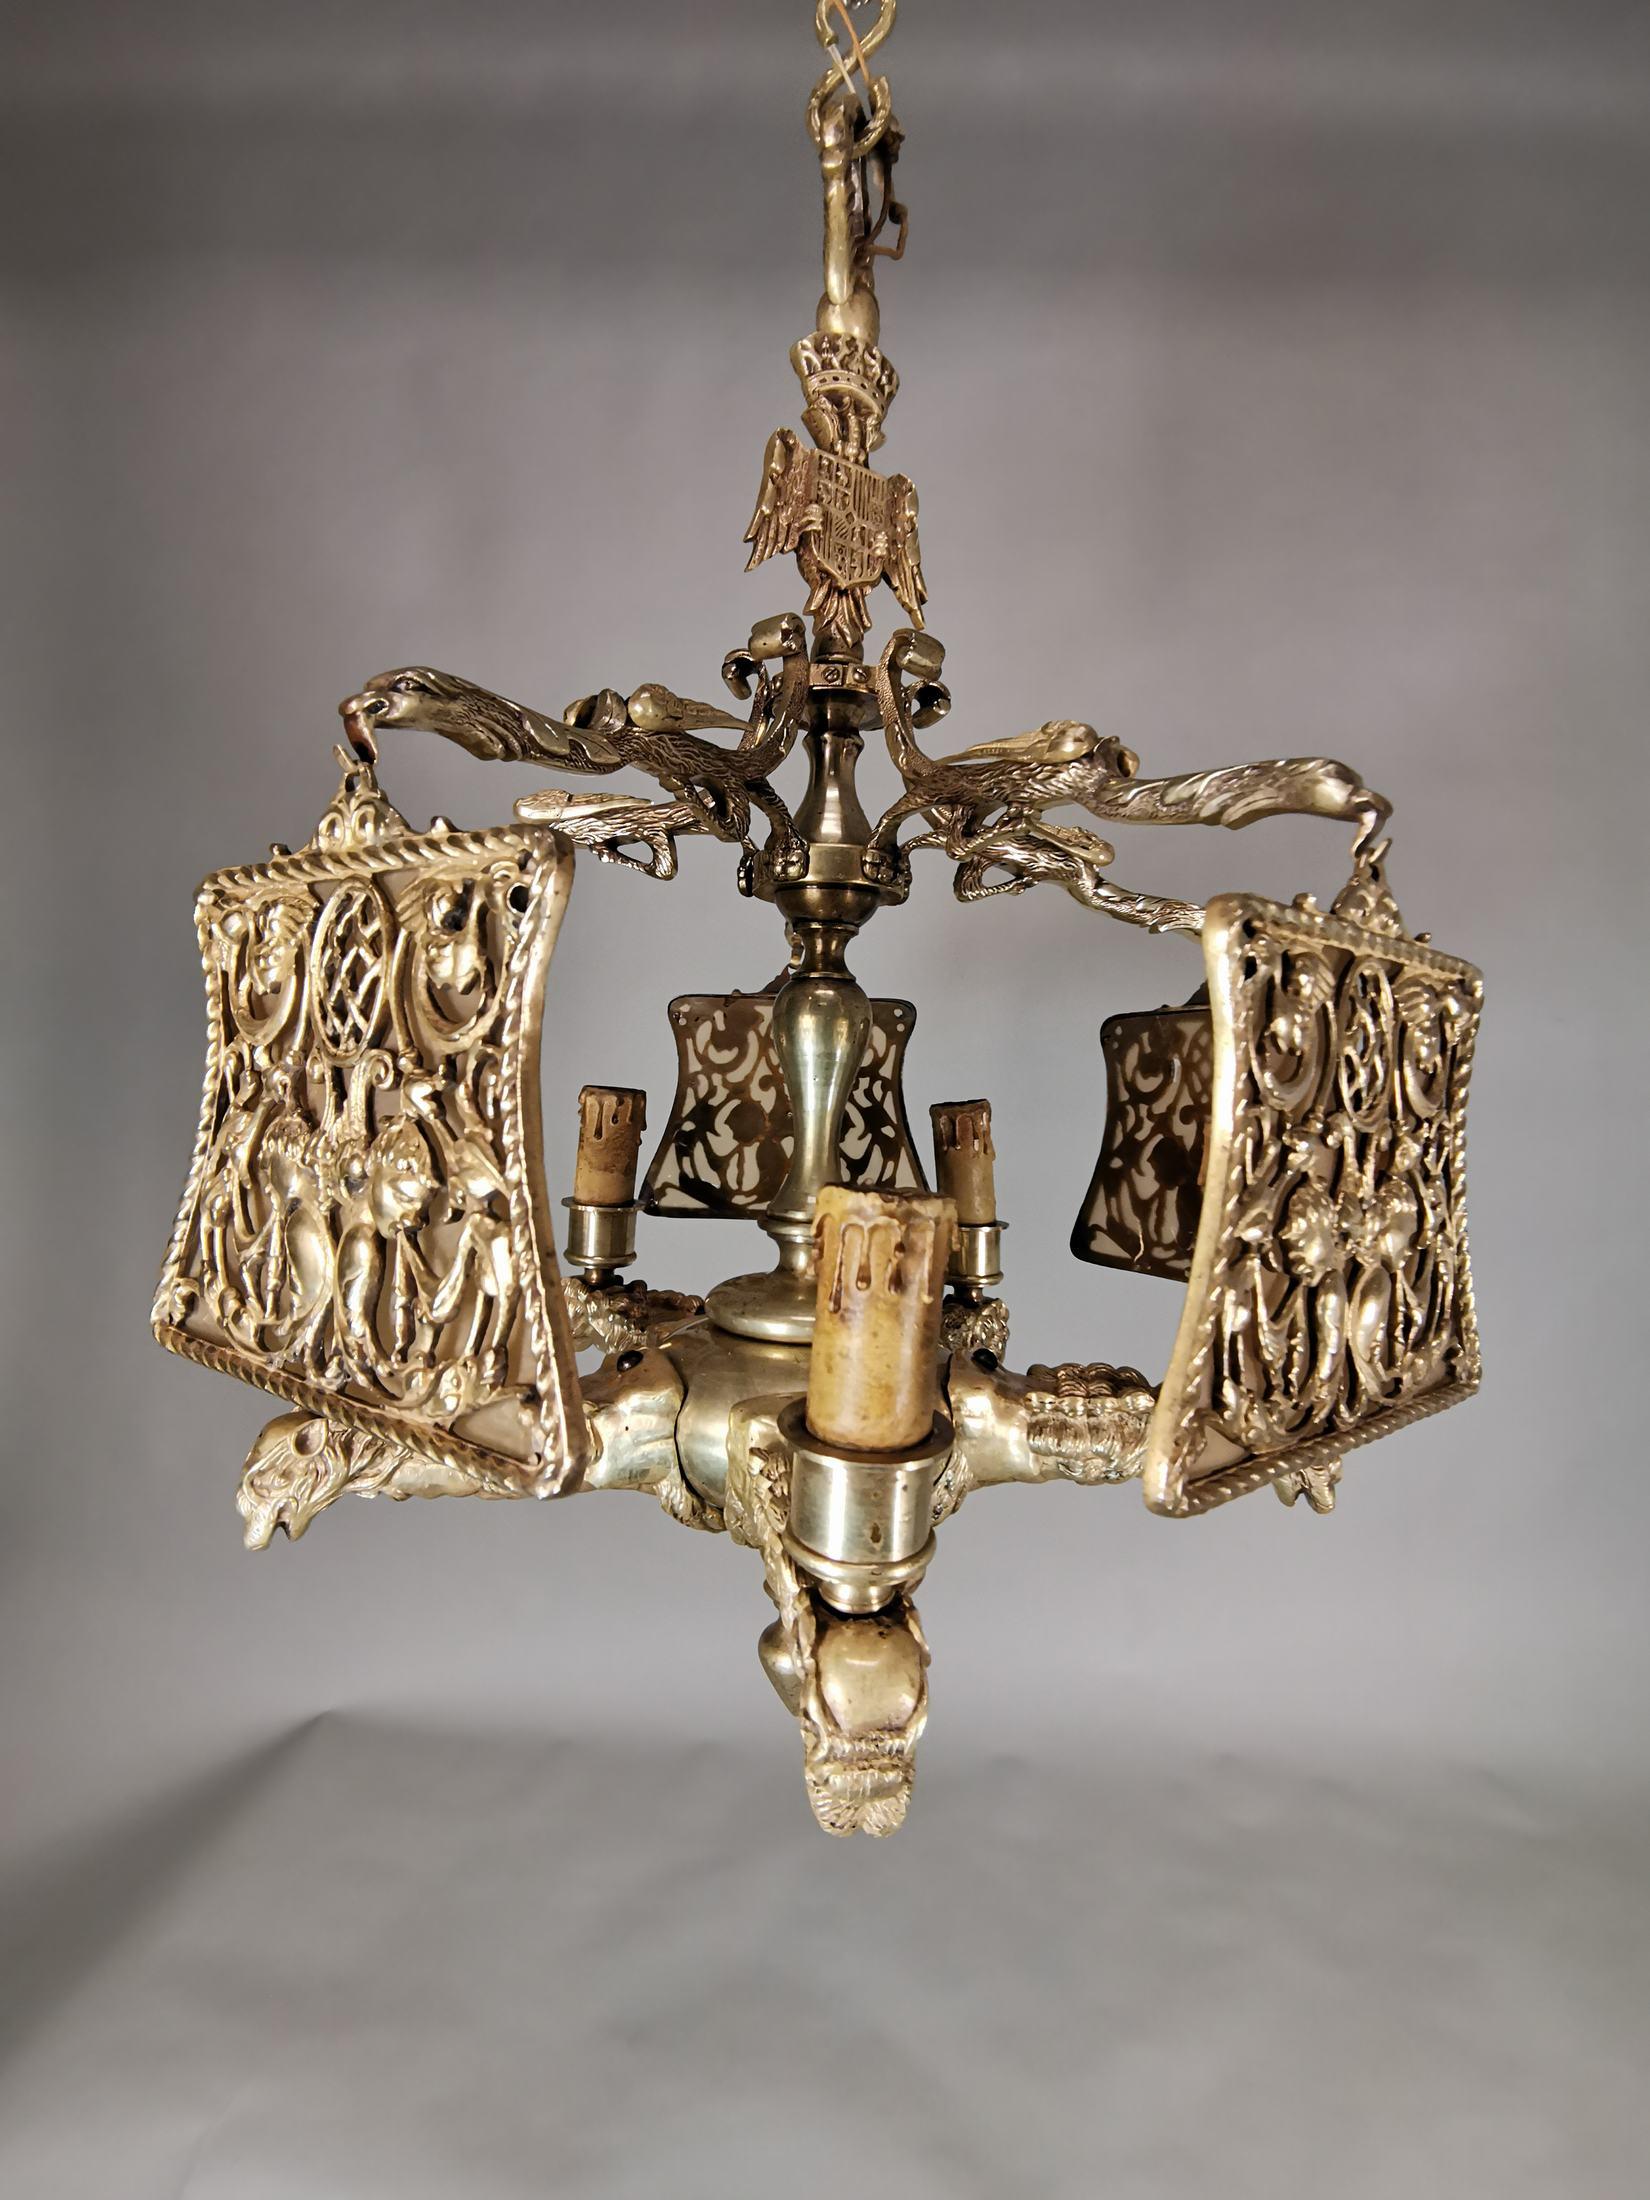 Important gilded bronze lamp of the 19th century
Decorated with dragons and crowned with a Nobiliary shield weight 20 kg measures 70 cm high and 50 cm in diameter.